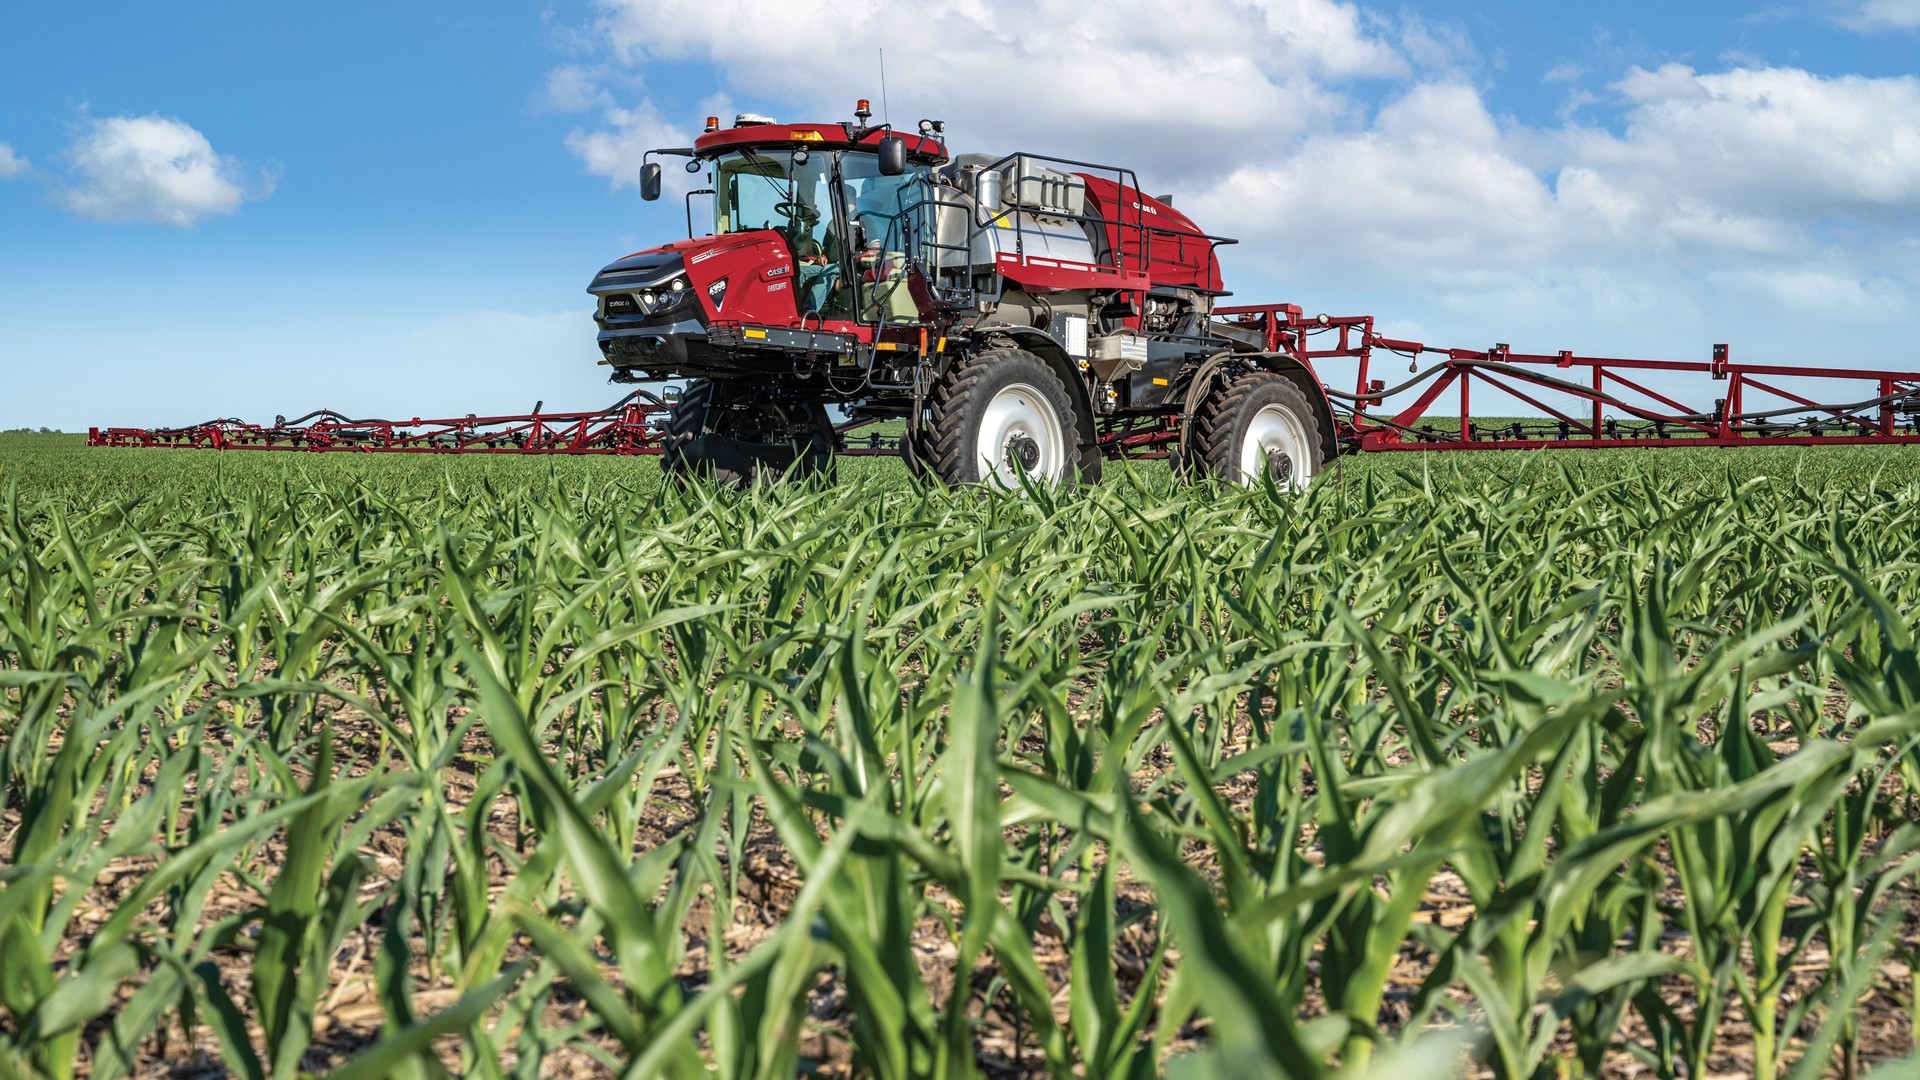 The high-efficiency Case IH Patriot® 50 series sprayer offers consistent and accurate application with a bold, new look.